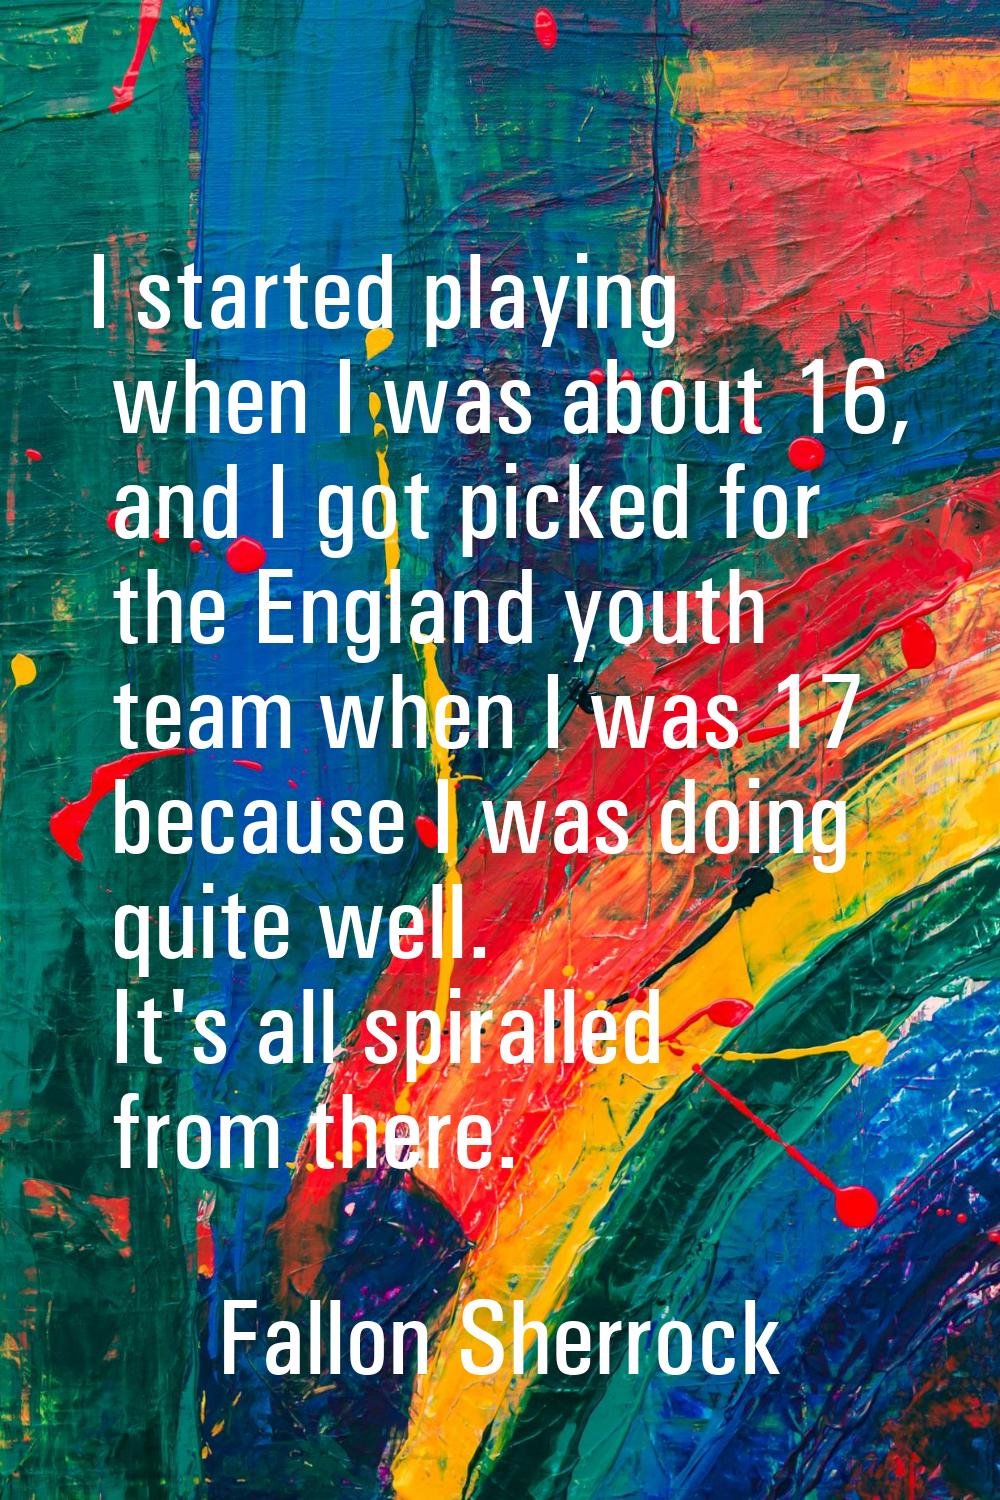 I started playing when I was about 16, and I got picked for the England youth team when I was 17 be